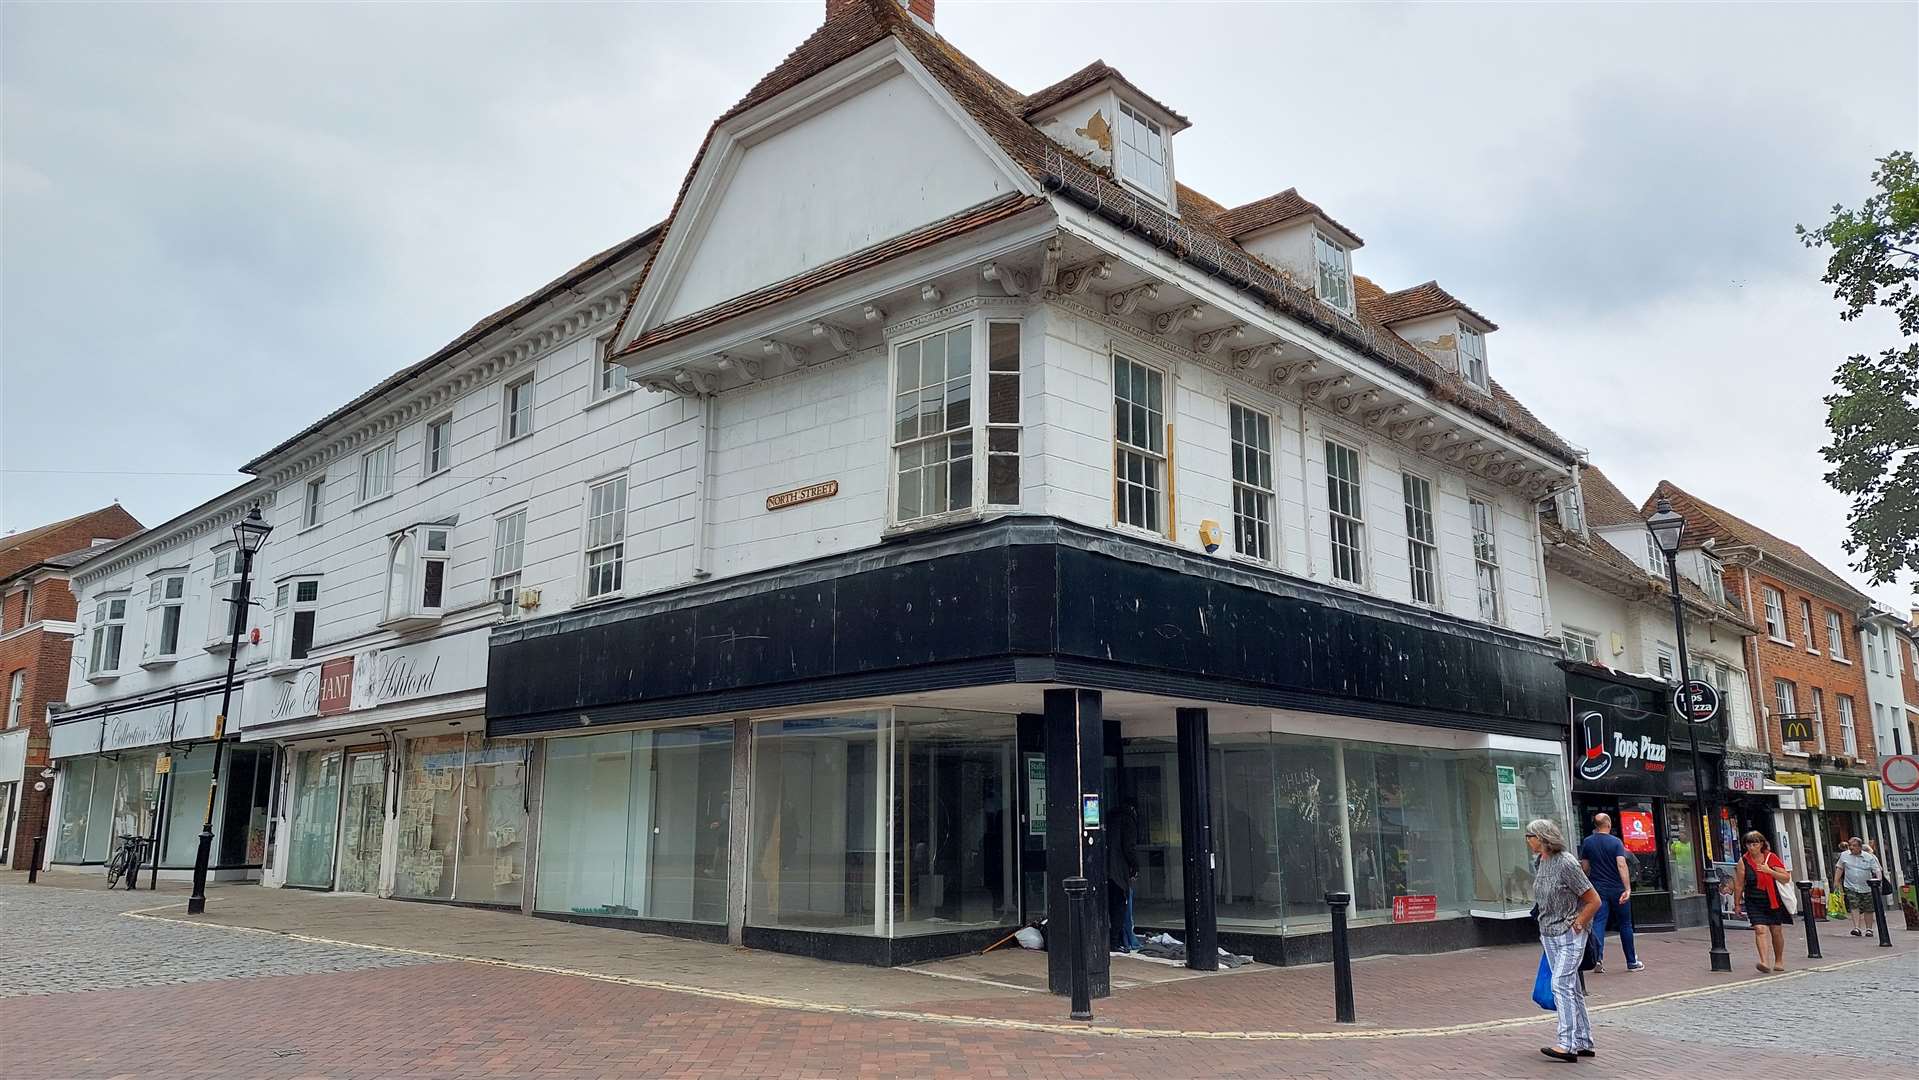 How the former Evans and Merchant Chandler buildings currently look